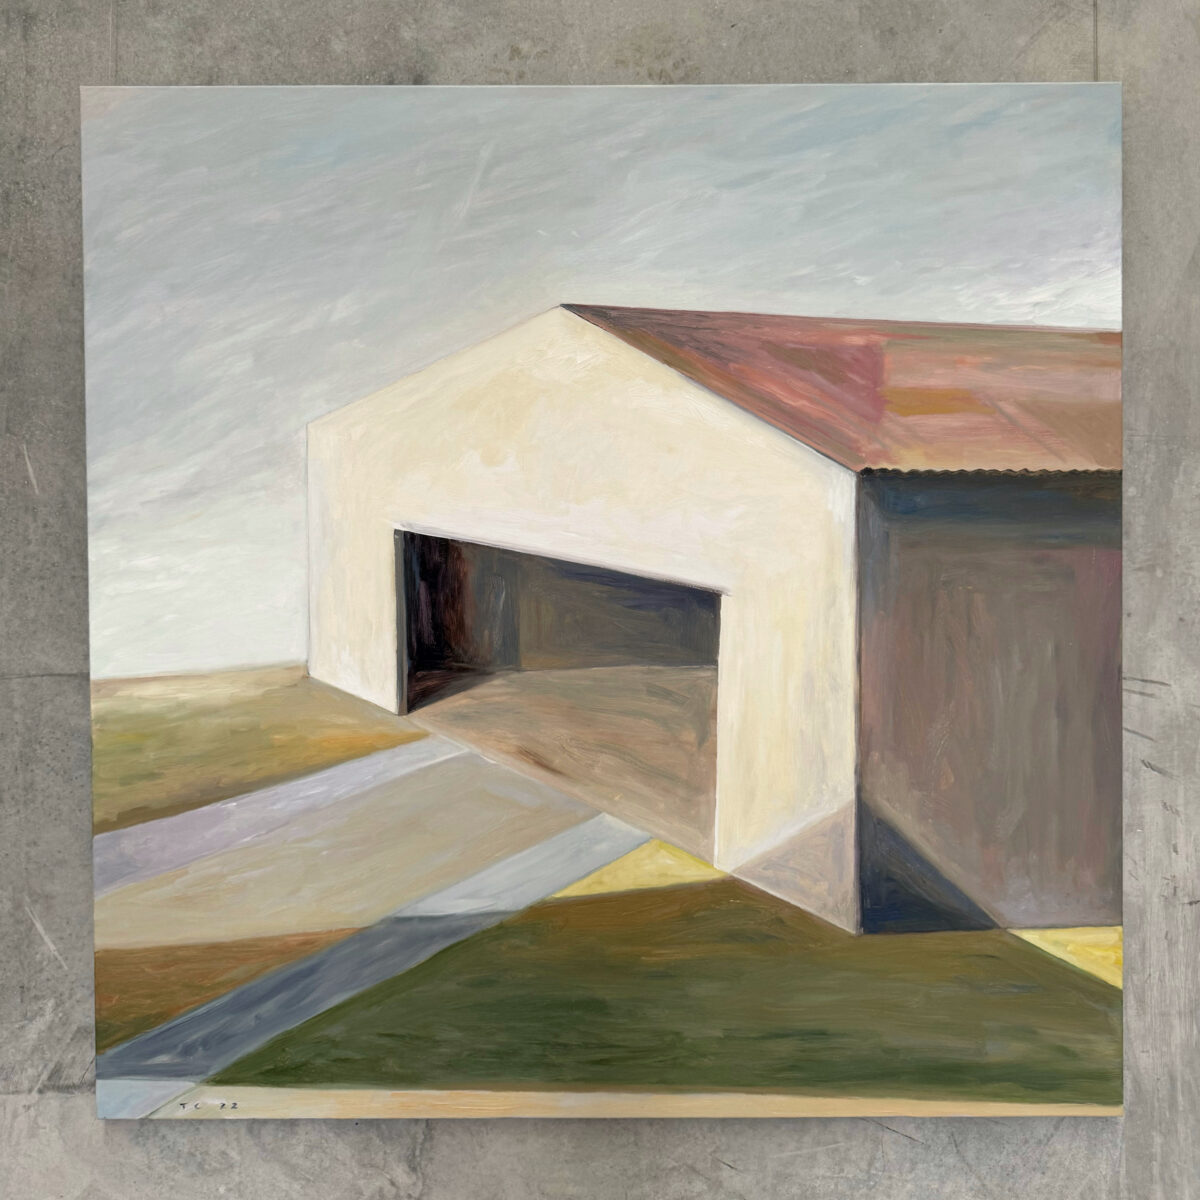 Shed | Tony Coles | oil on canvas | 150 x 150 cm | $7,000